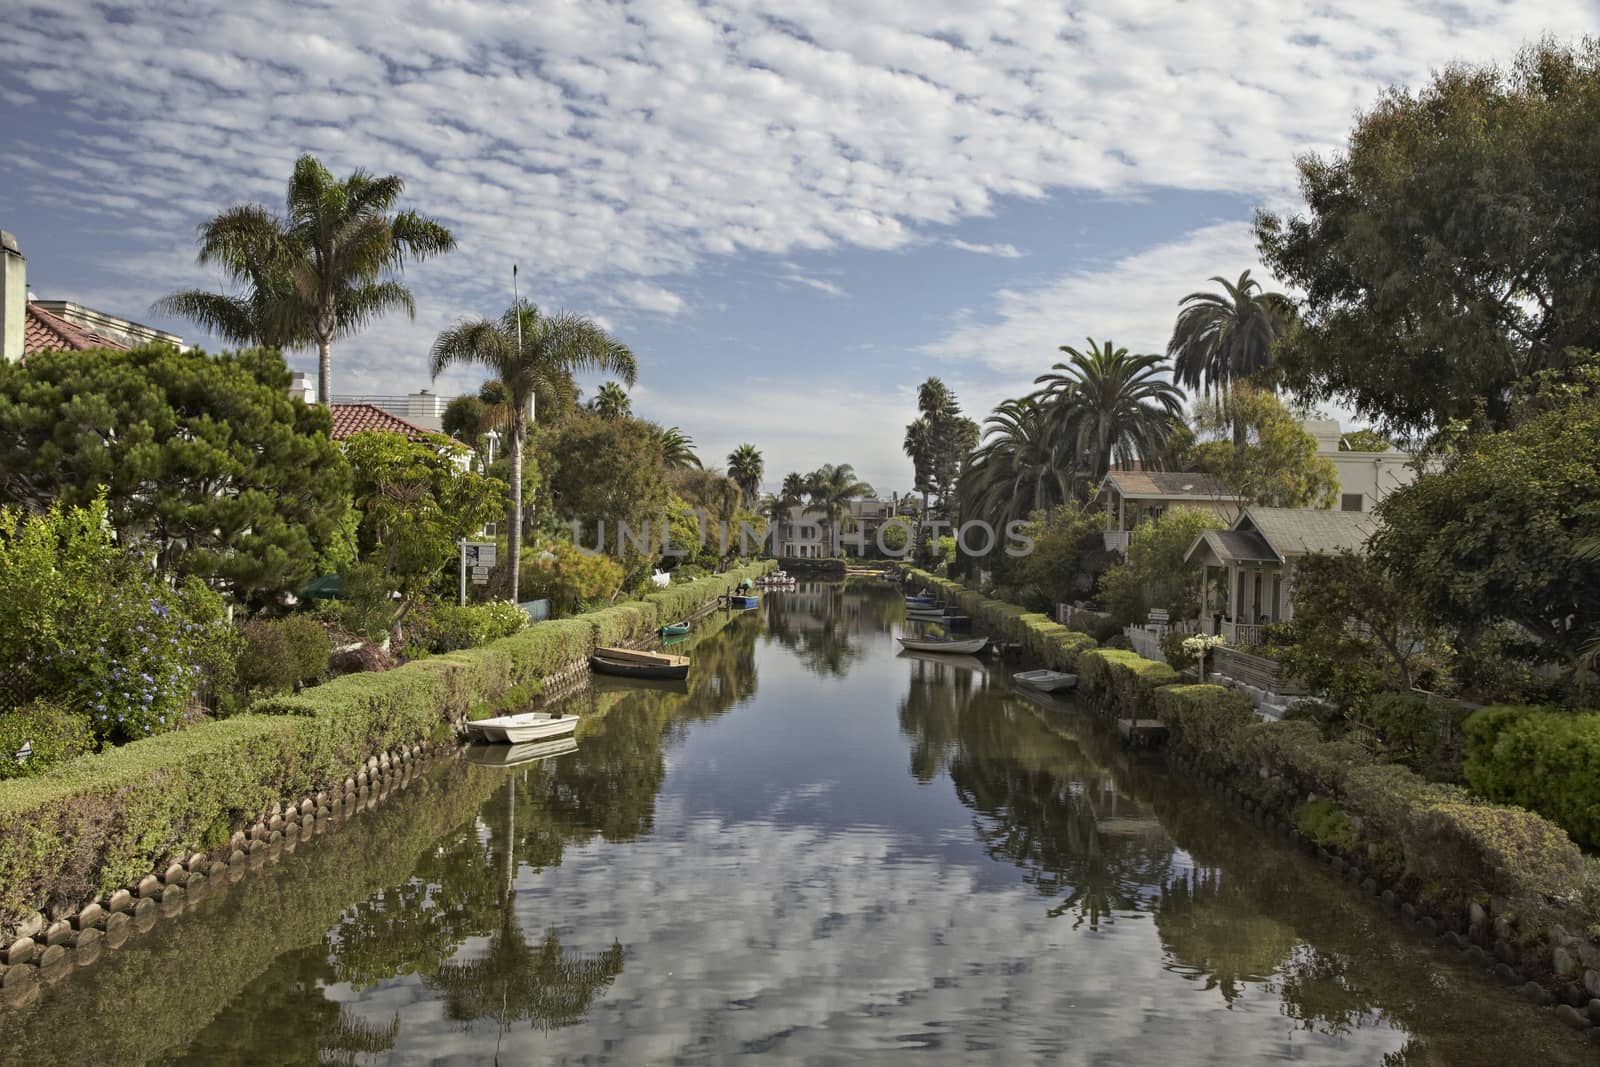 Venice canal Los Angeles, California, United States by Tjeerdkruse